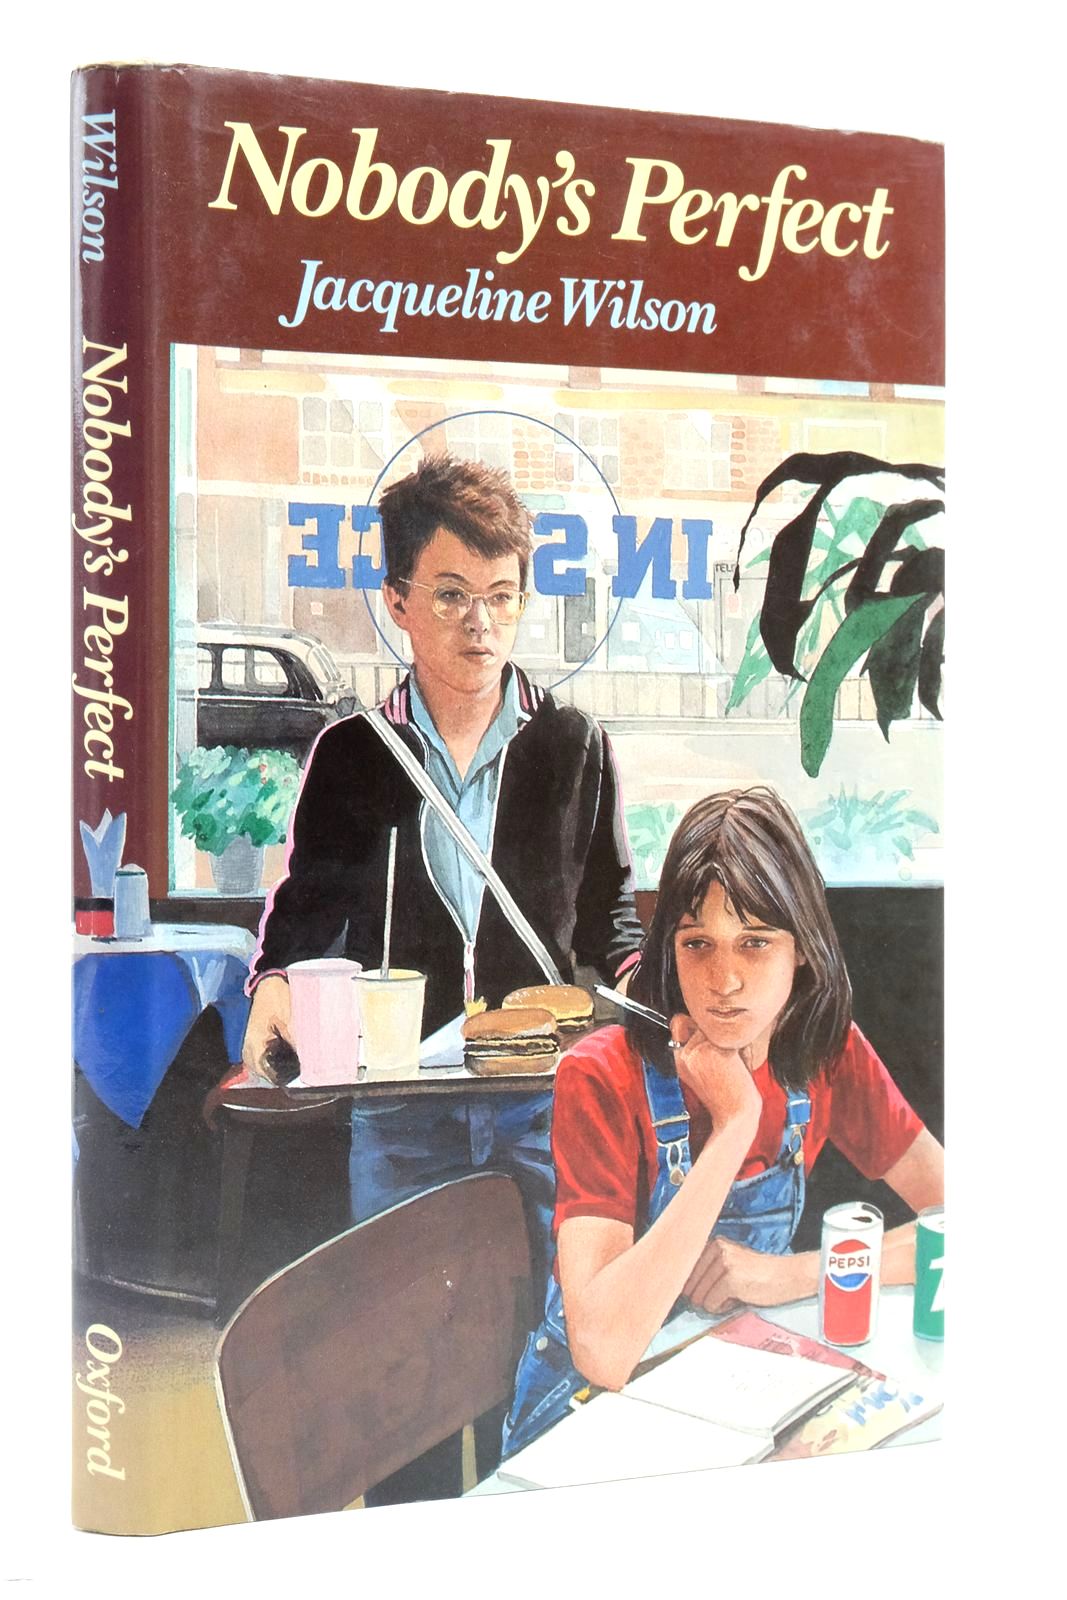 Photo of NOBODY'S PERFECT written by Wilson, Jacqueline published by Oxford University Press (STOCK CODE: 2137457)  for sale by Stella & Rose's Books